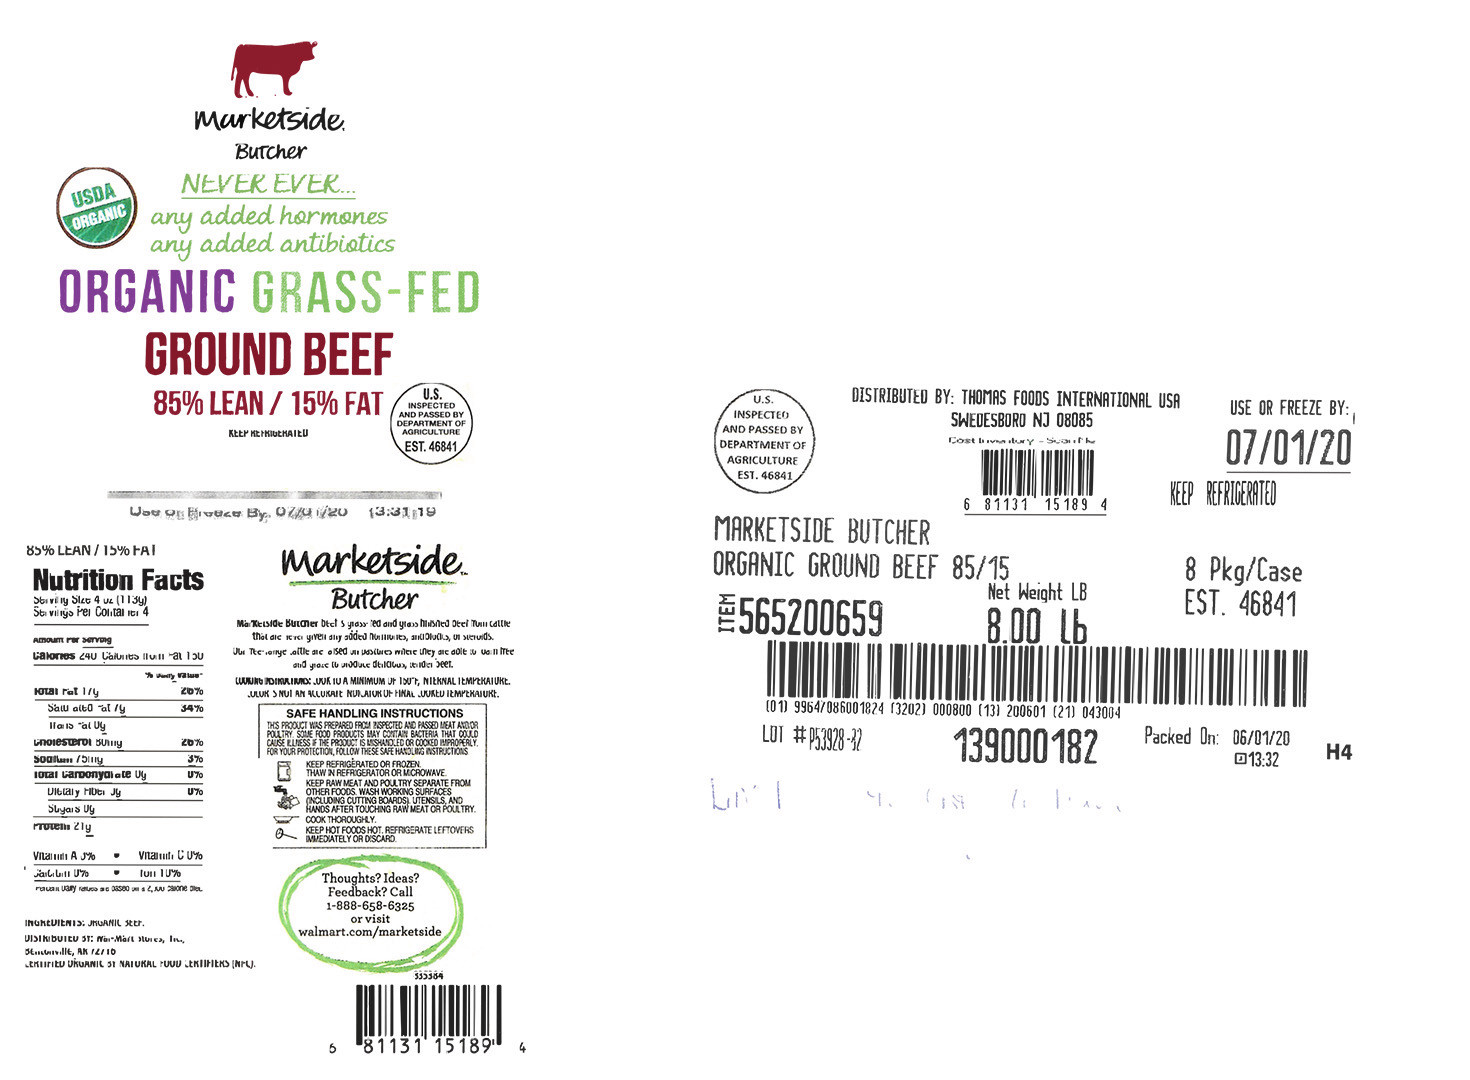 Recall Ground Beef
 Ground beef recalled for possible E coli contamination